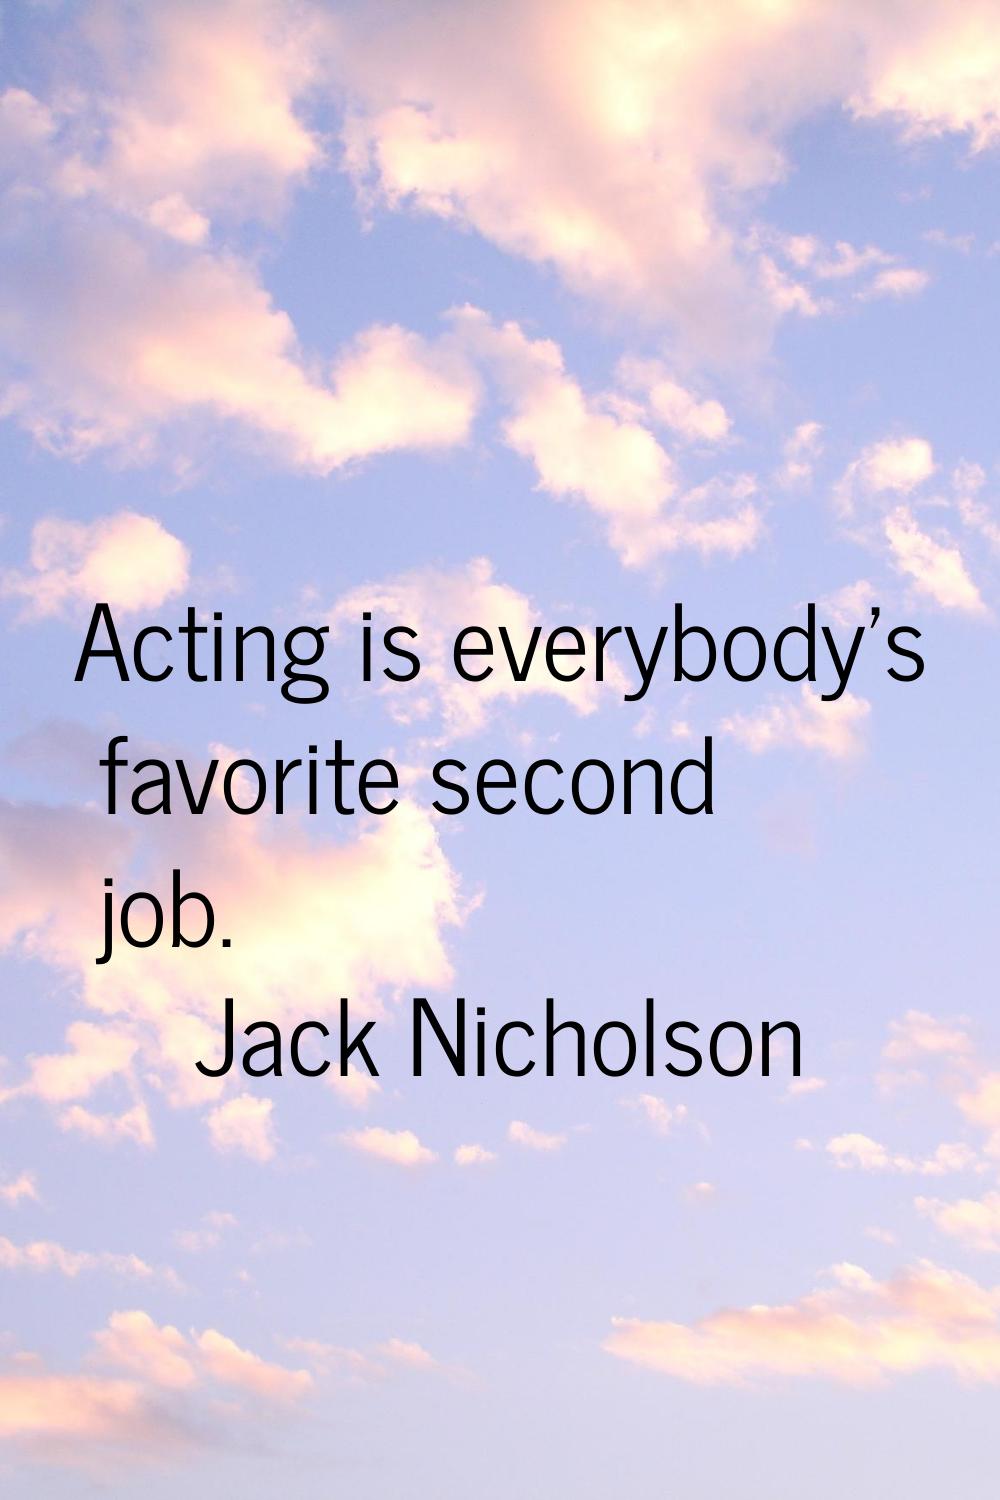 Acting is everybody's favorite second job.